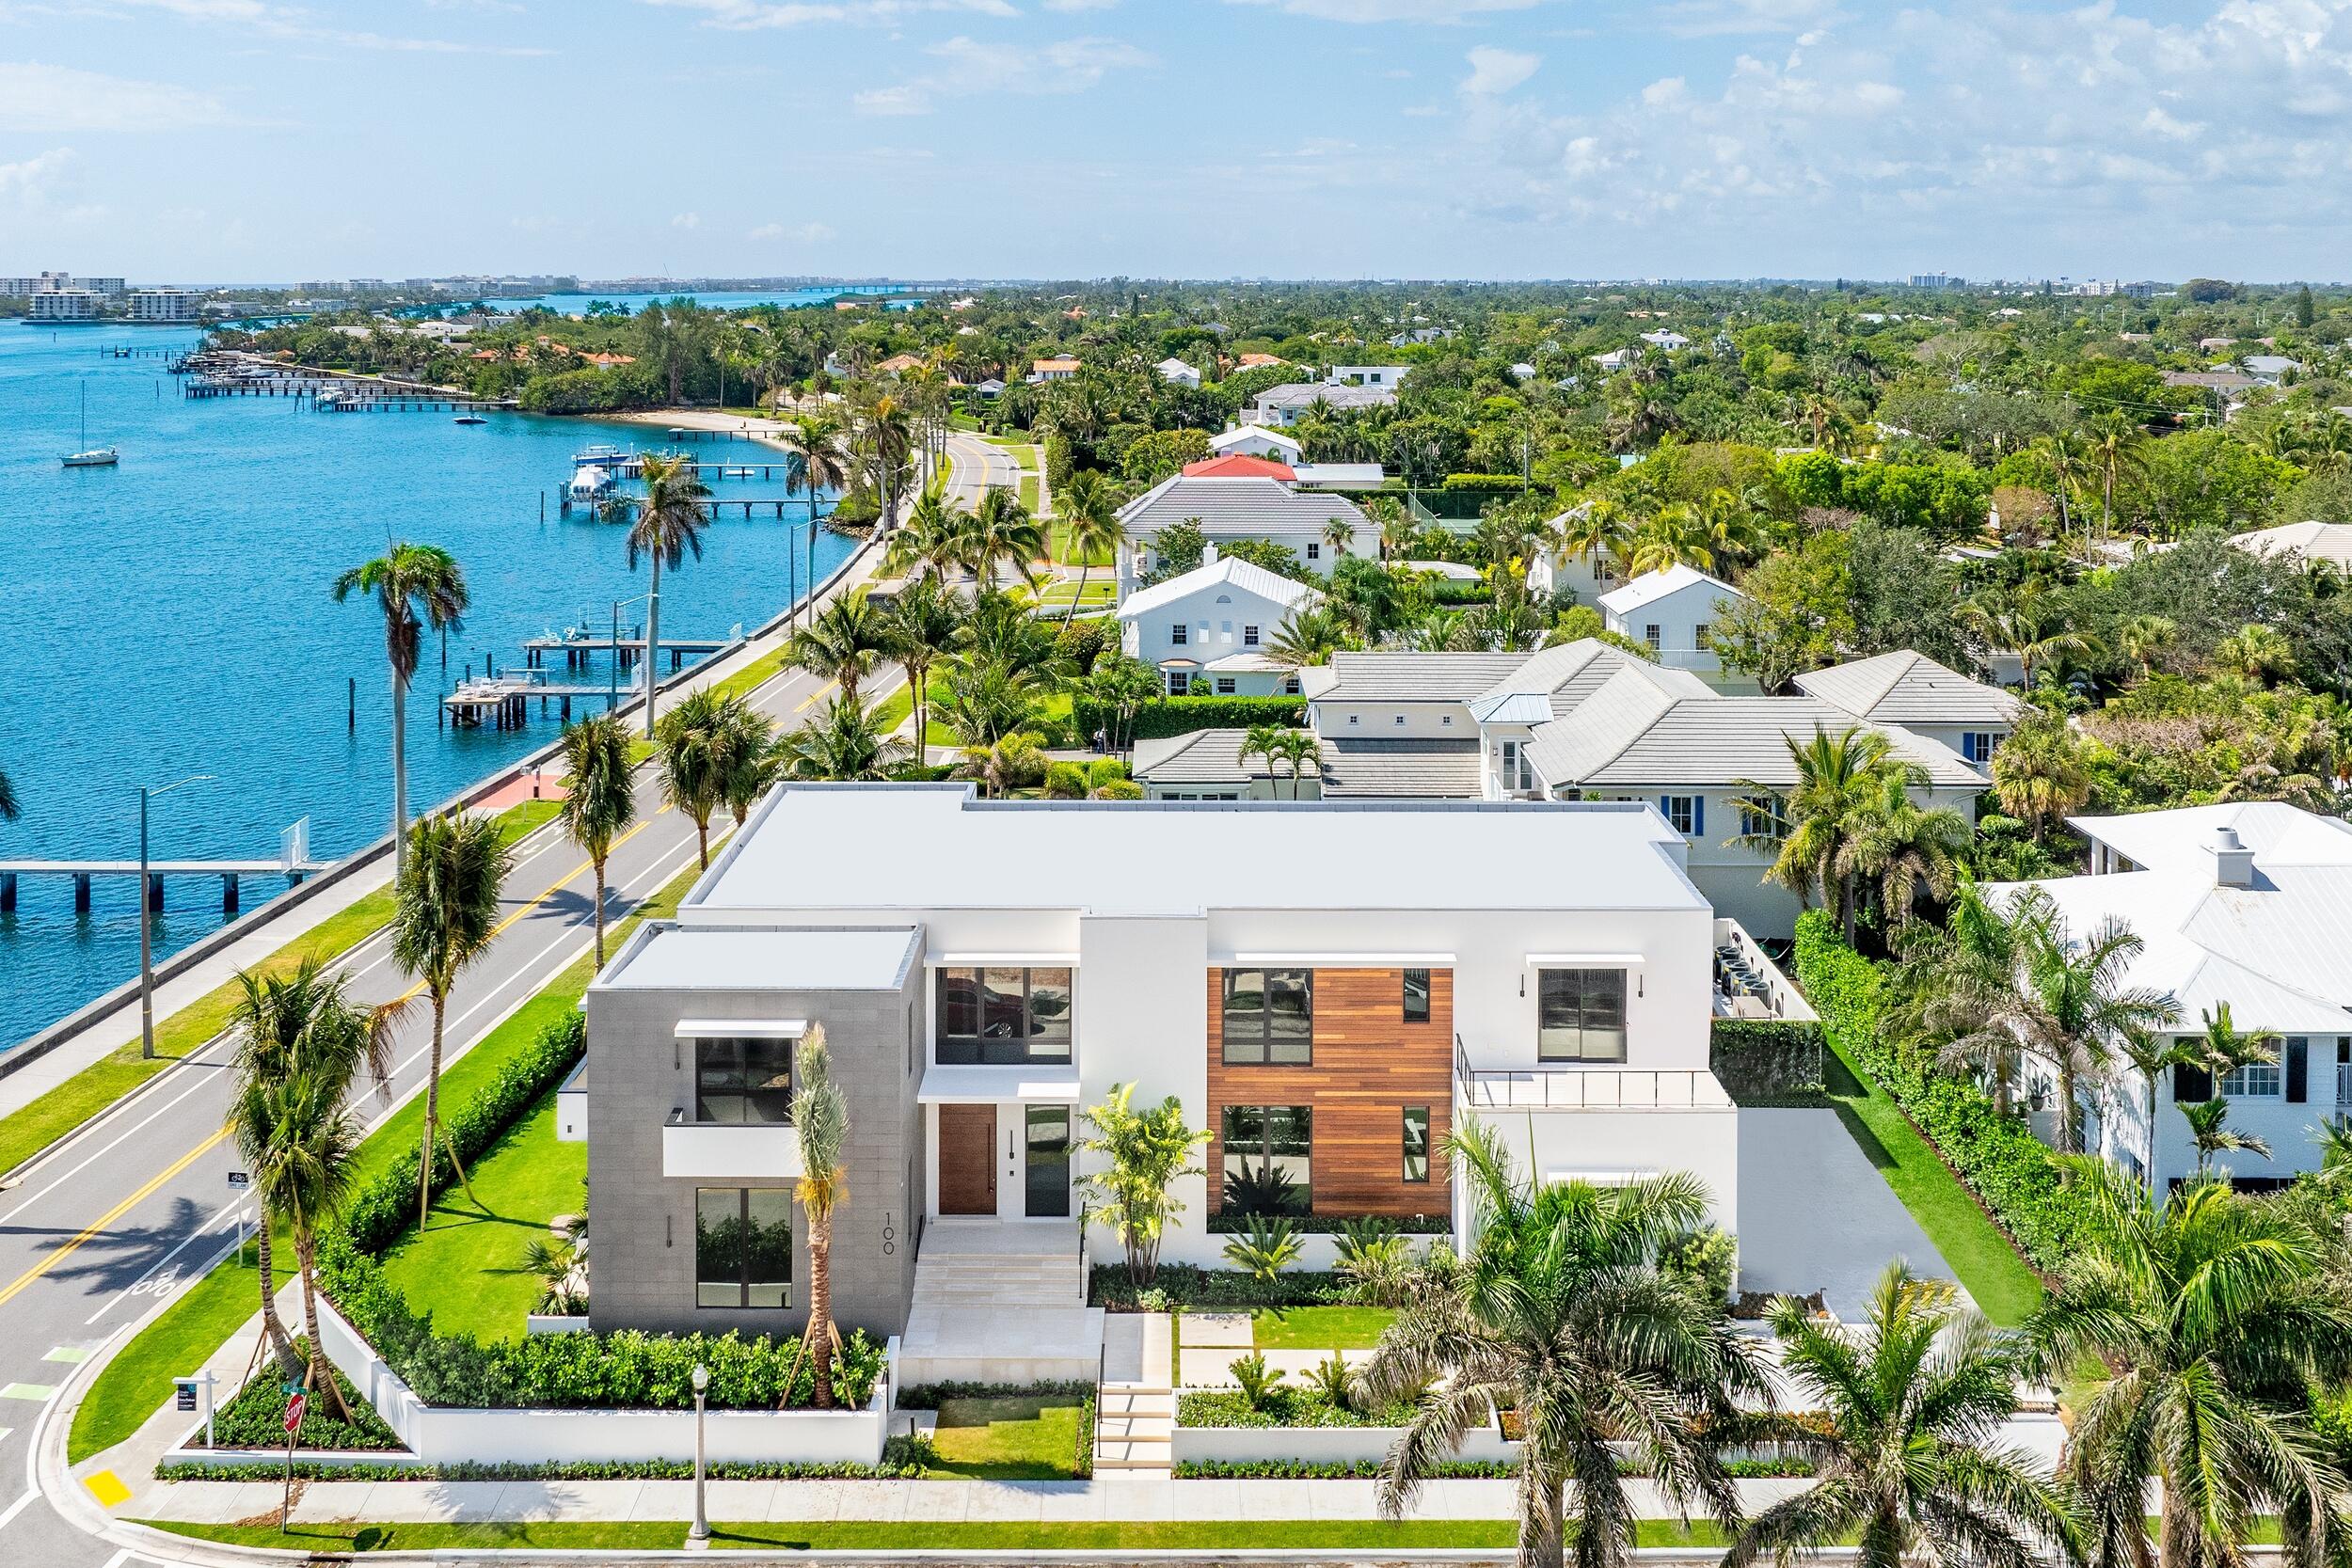 100 Beverly Road, West Palm Beach, Palm Beach County, Florida - 8 Bedrooms  
10.5 Bathrooms - 